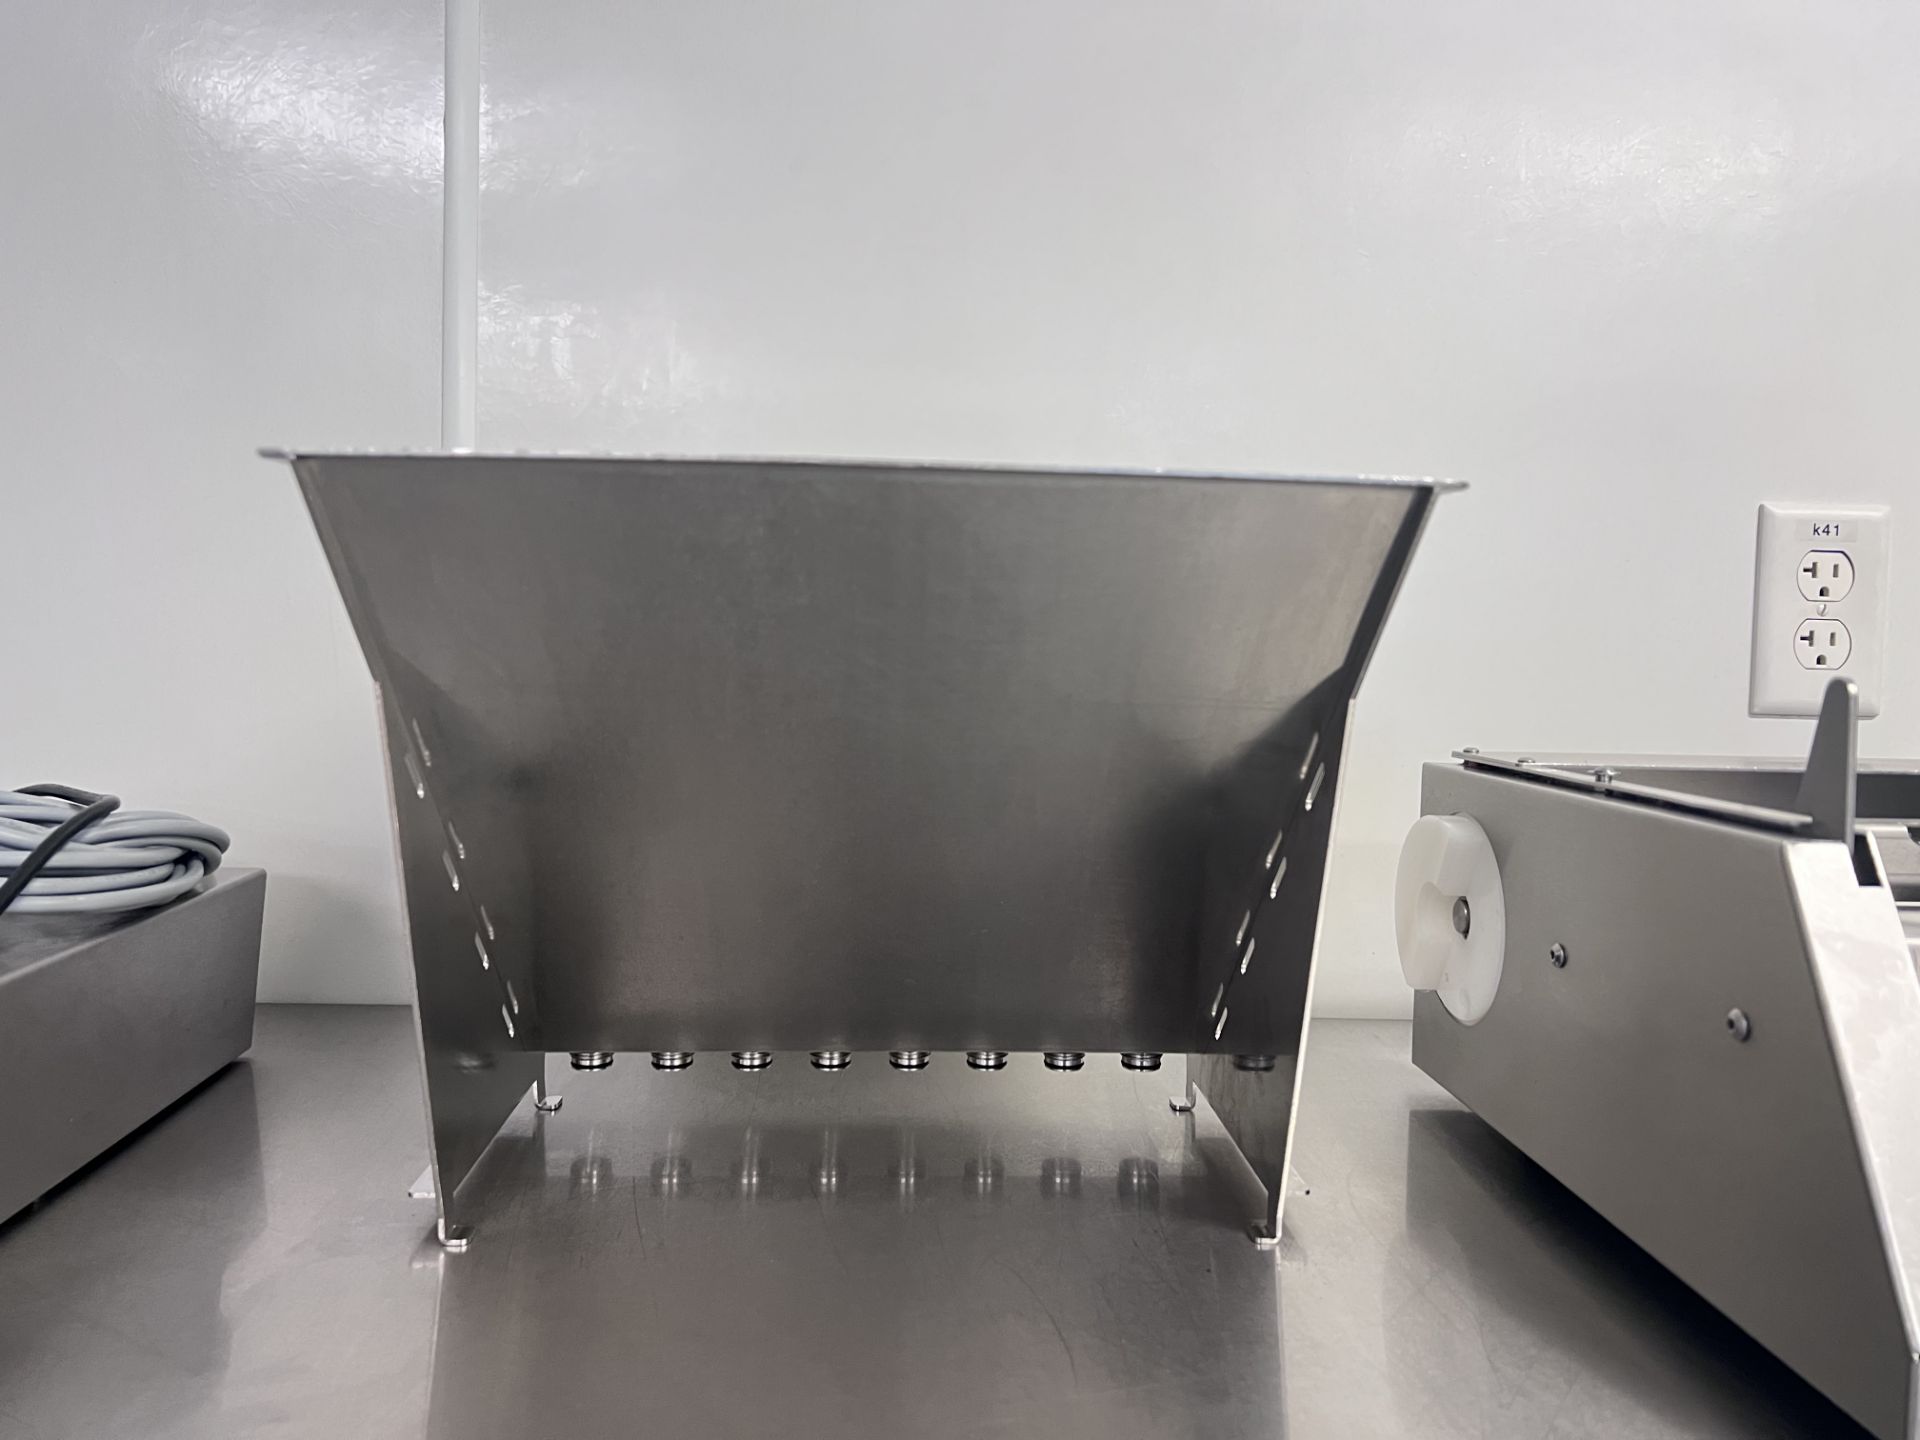 Truffly Made XL Universal Candy, Gummy, or Chocolate Depositor. XL hopper, 12L capacity, heated. - Image 2 of 9